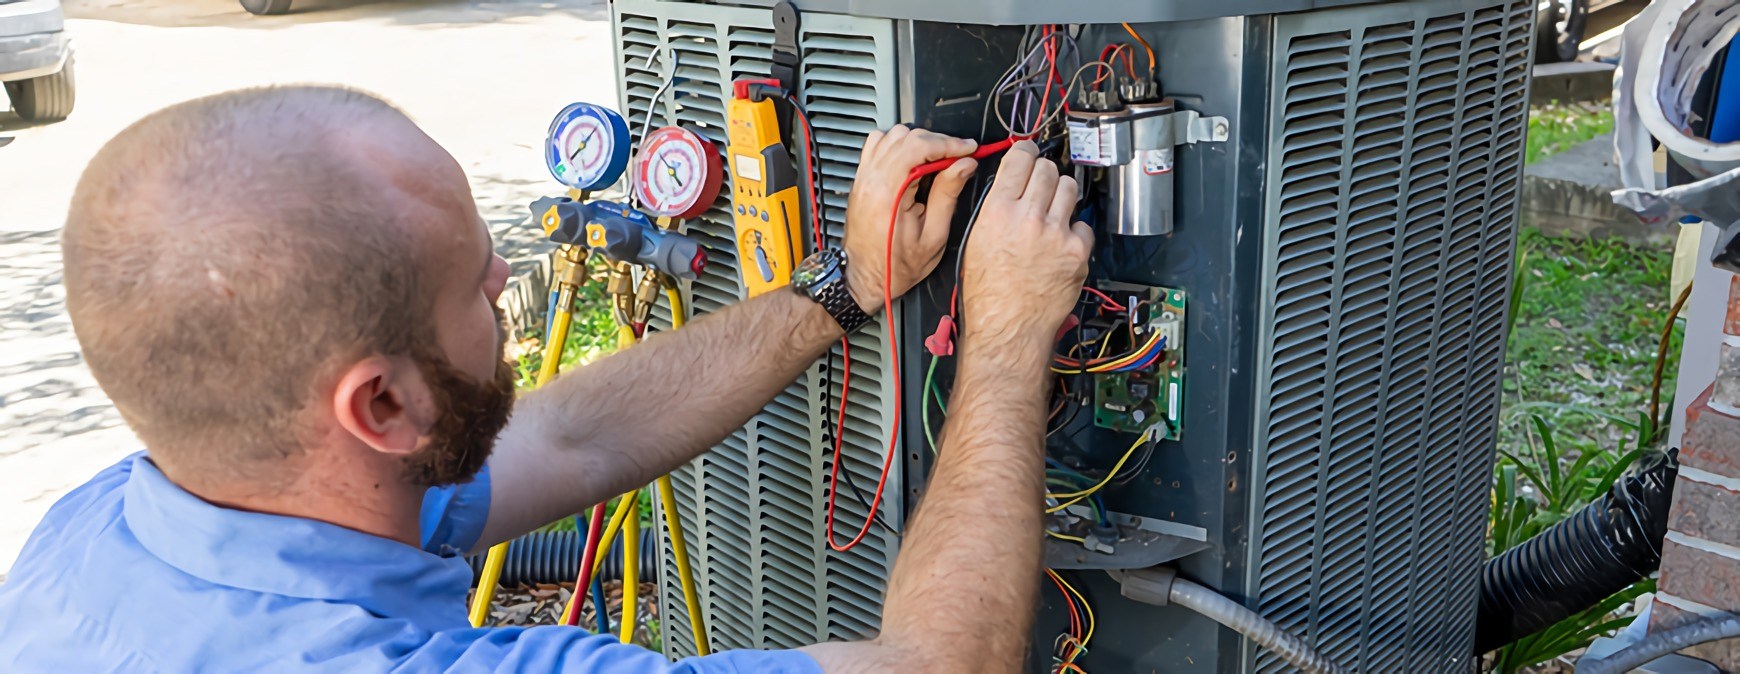 Technician checking outdoor HVAC system